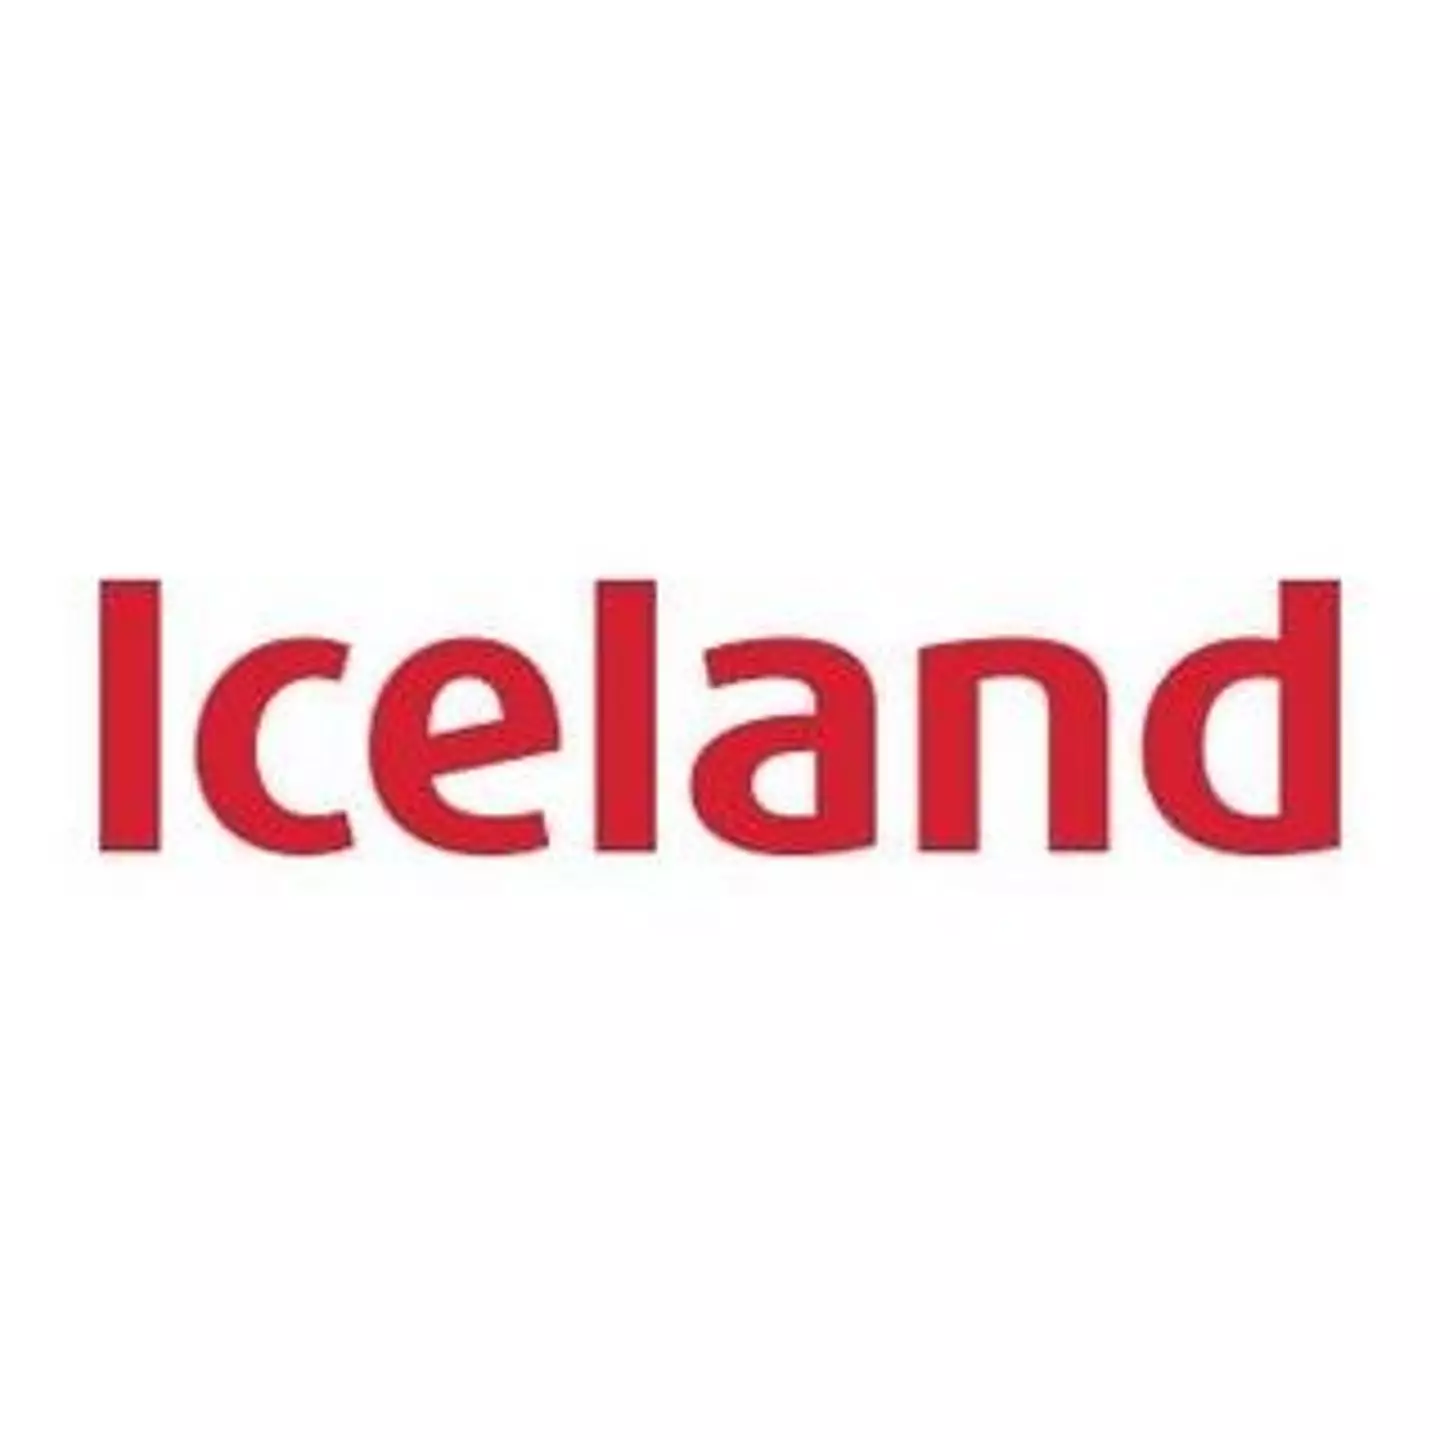 Iceland want to help struggling customers afford Christmas dinner.